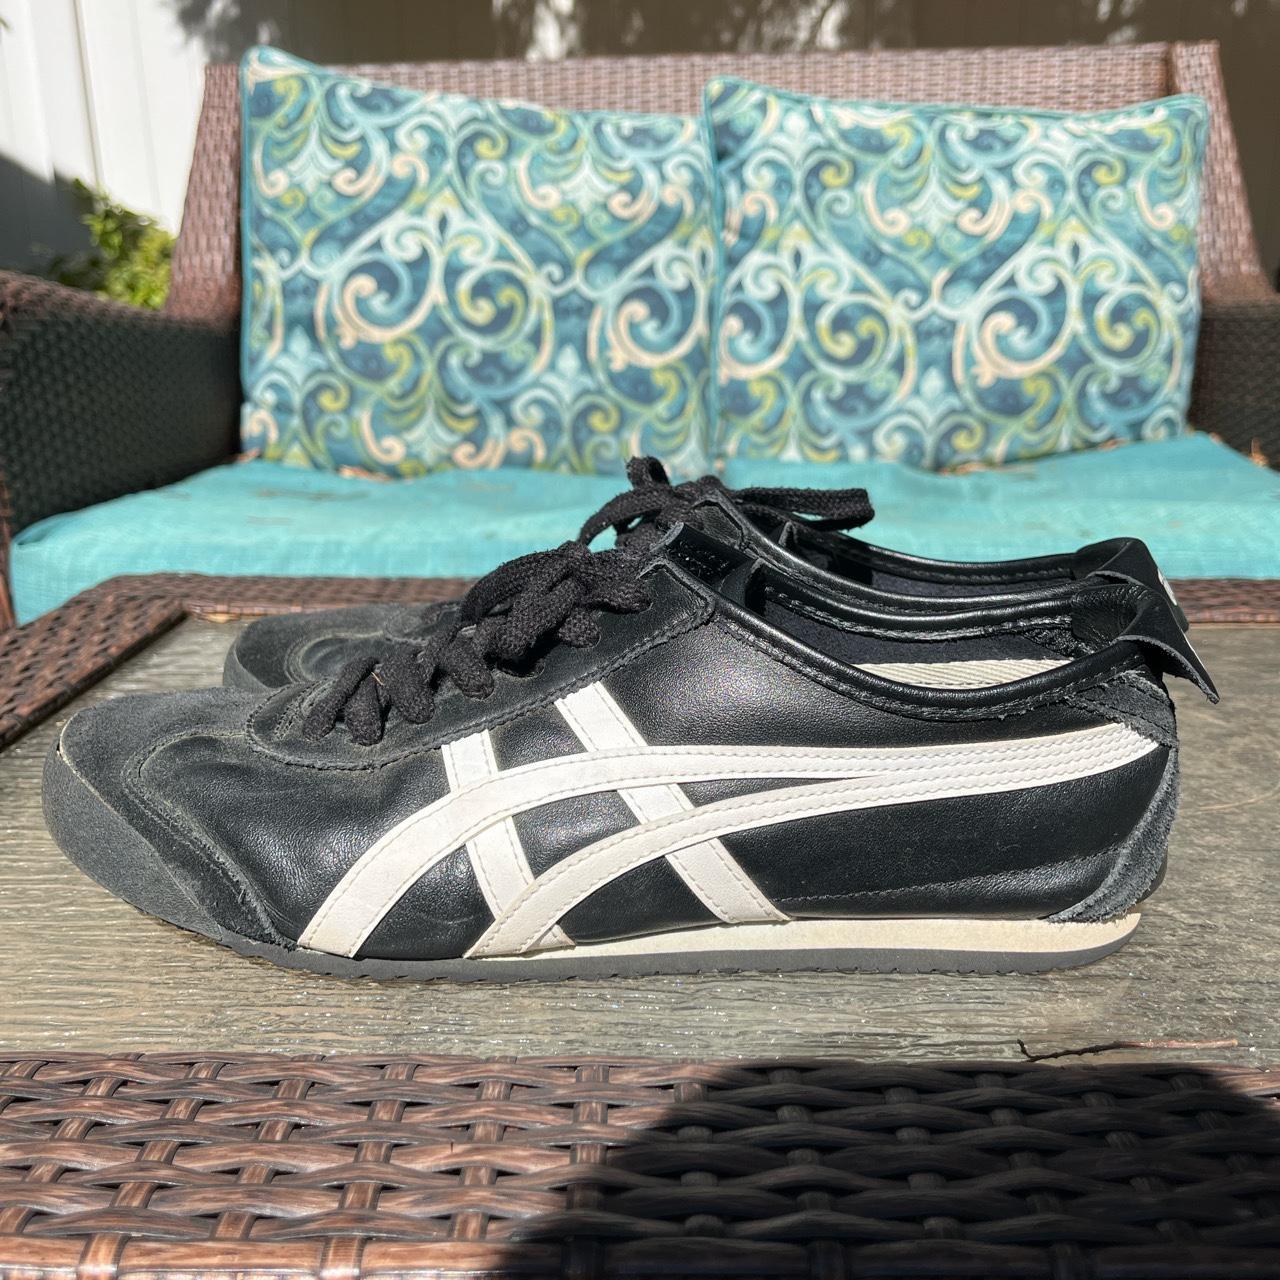 Used Mexico 66 onitsuka tigers with box, size 10.5,... - Depop